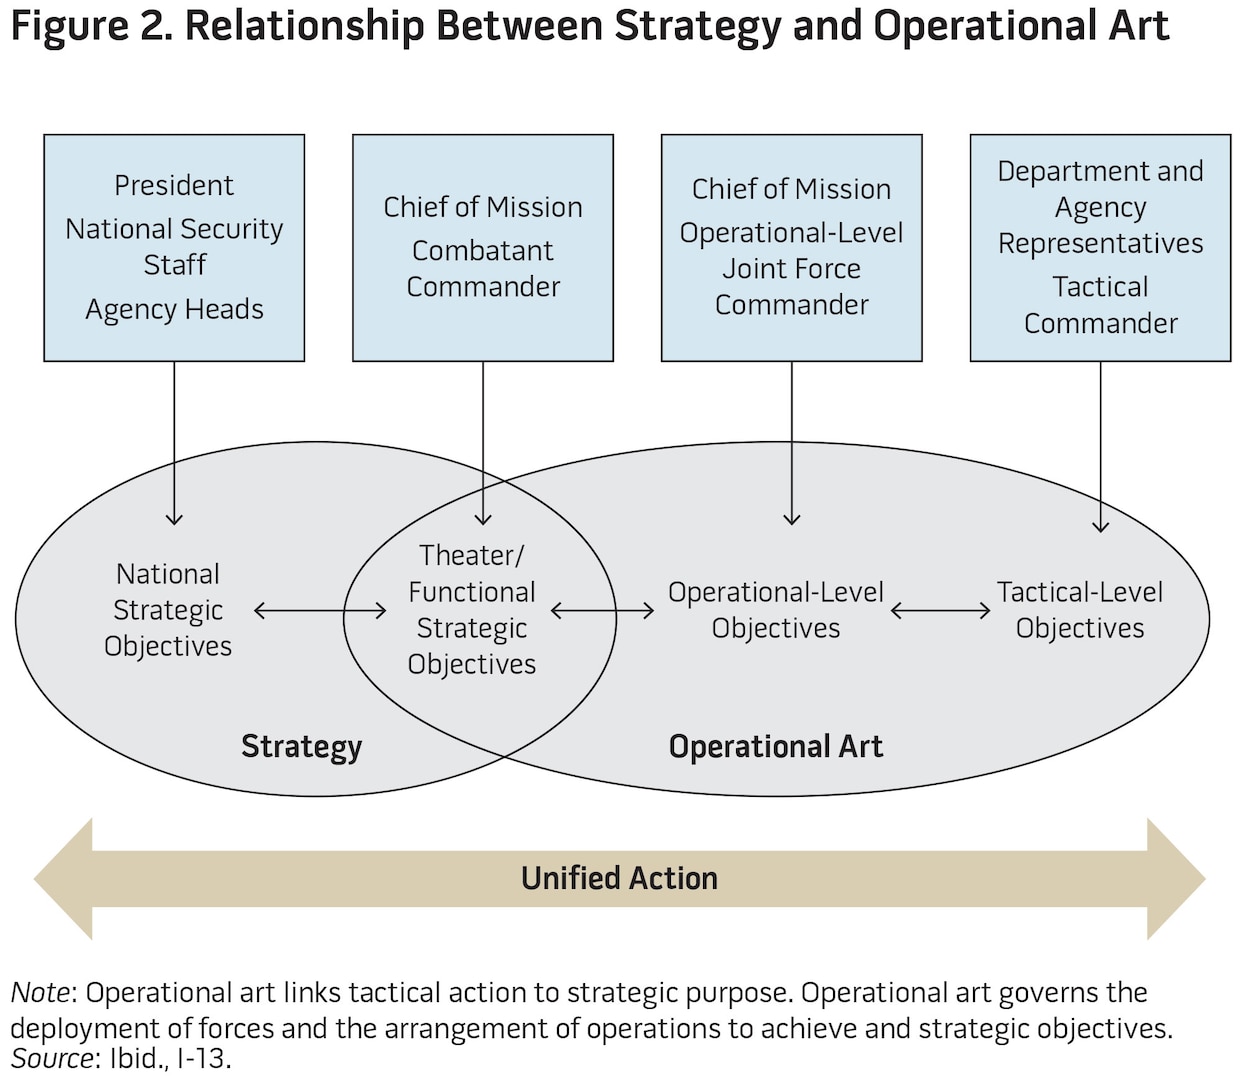 Figure 2. Relationship Between Strategy and Operational Art